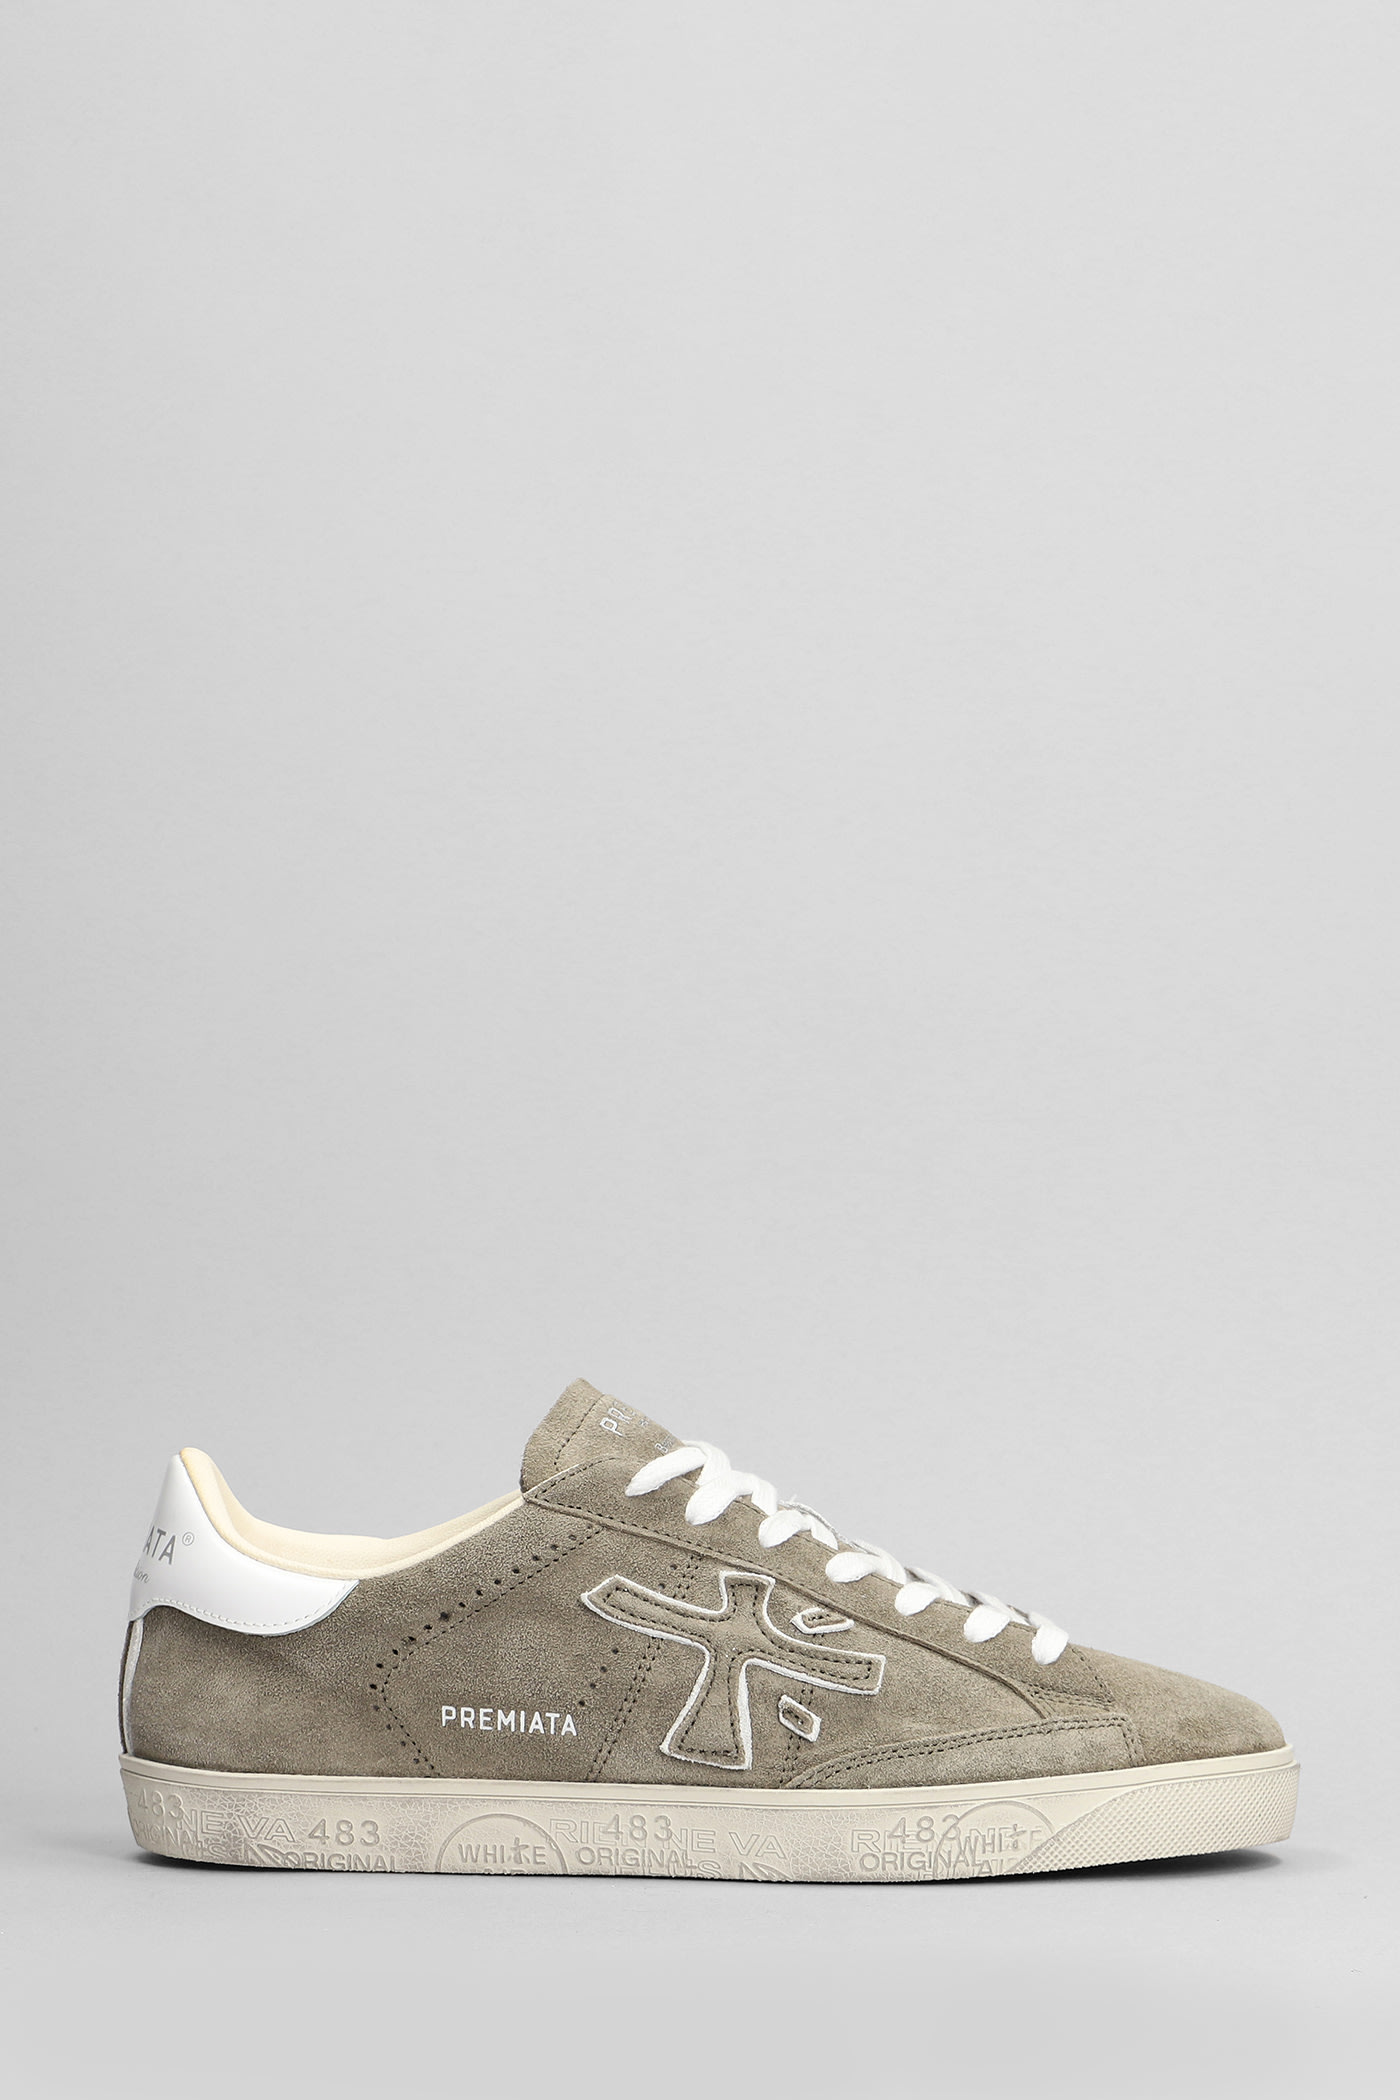 Premiata Steven Sneakers In Taupe Suede And Fabric